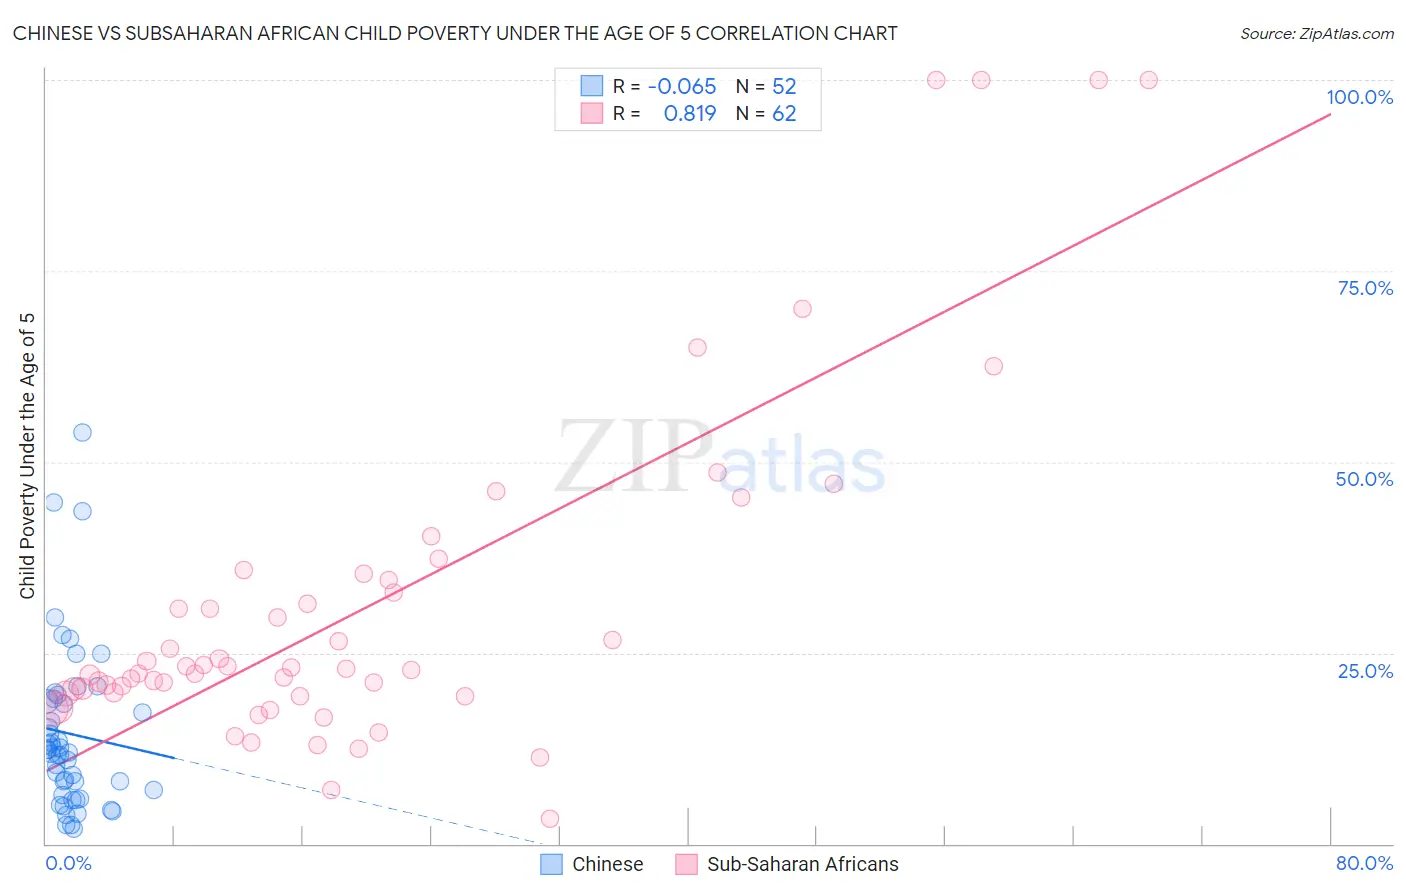 Chinese vs Subsaharan African Child Poverty Under the Age of 5